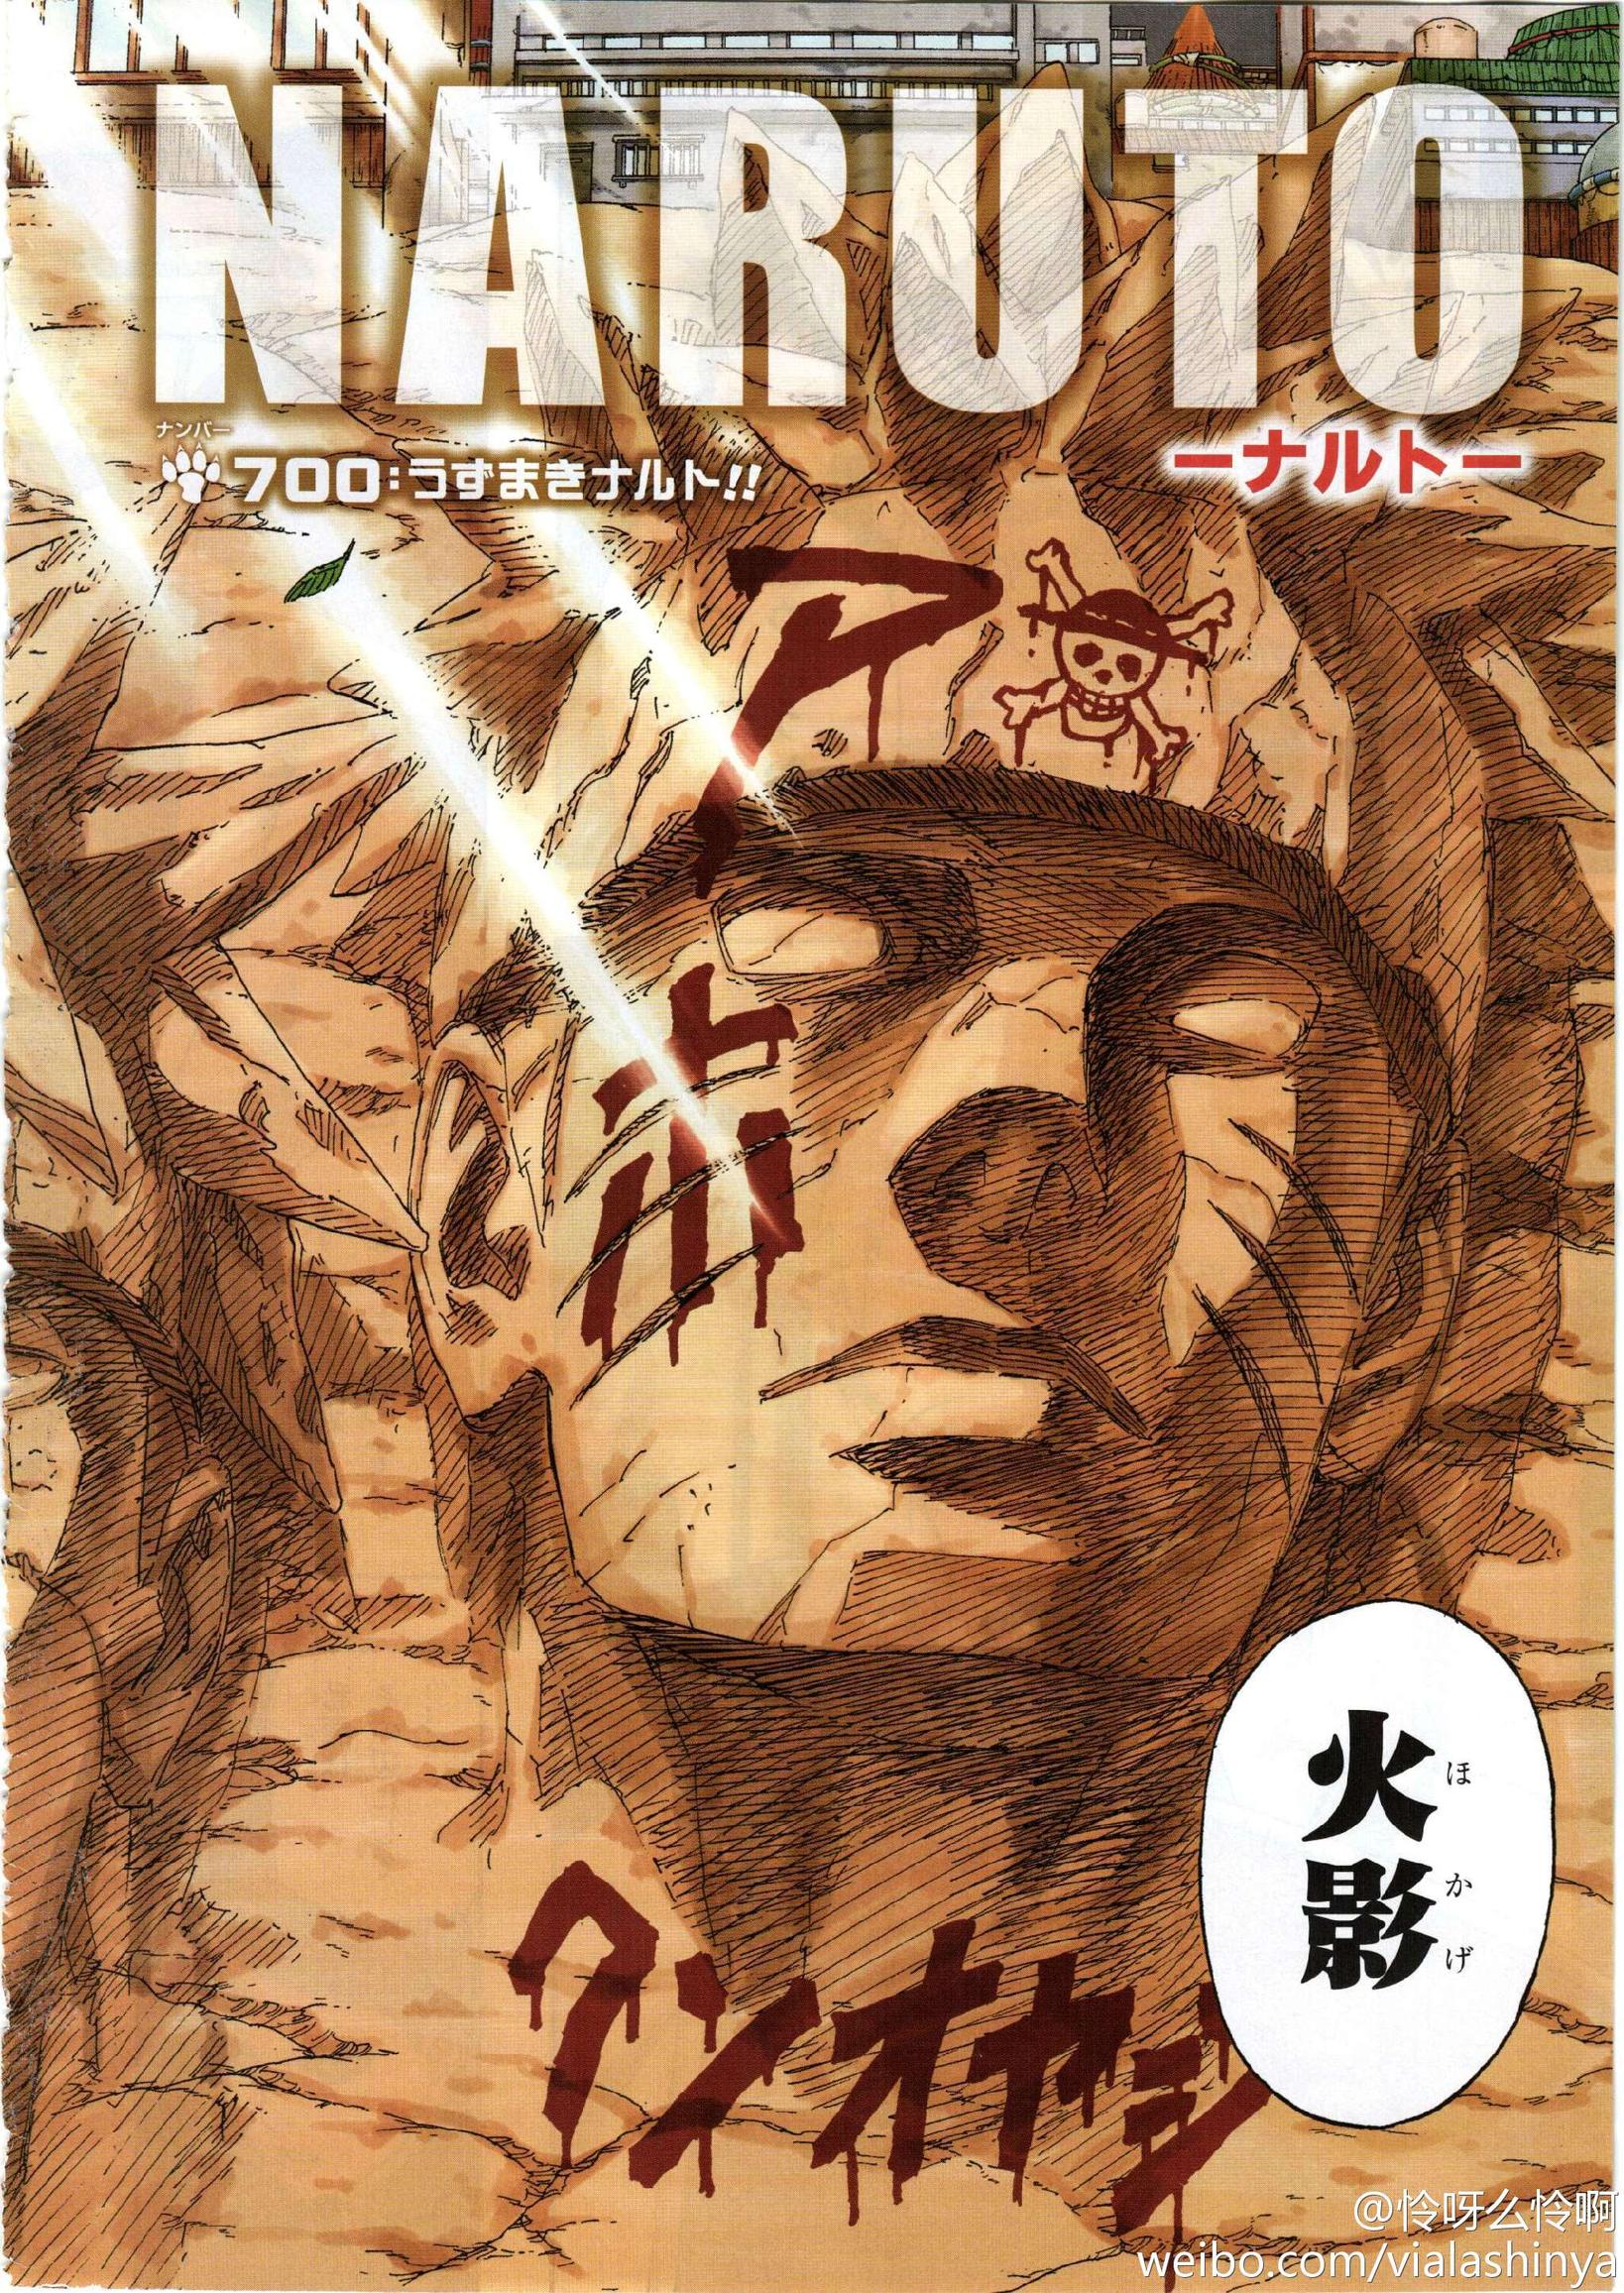 One Piece Chapter 766s Cover Page Is Dedicated To Naruto Haruhichan